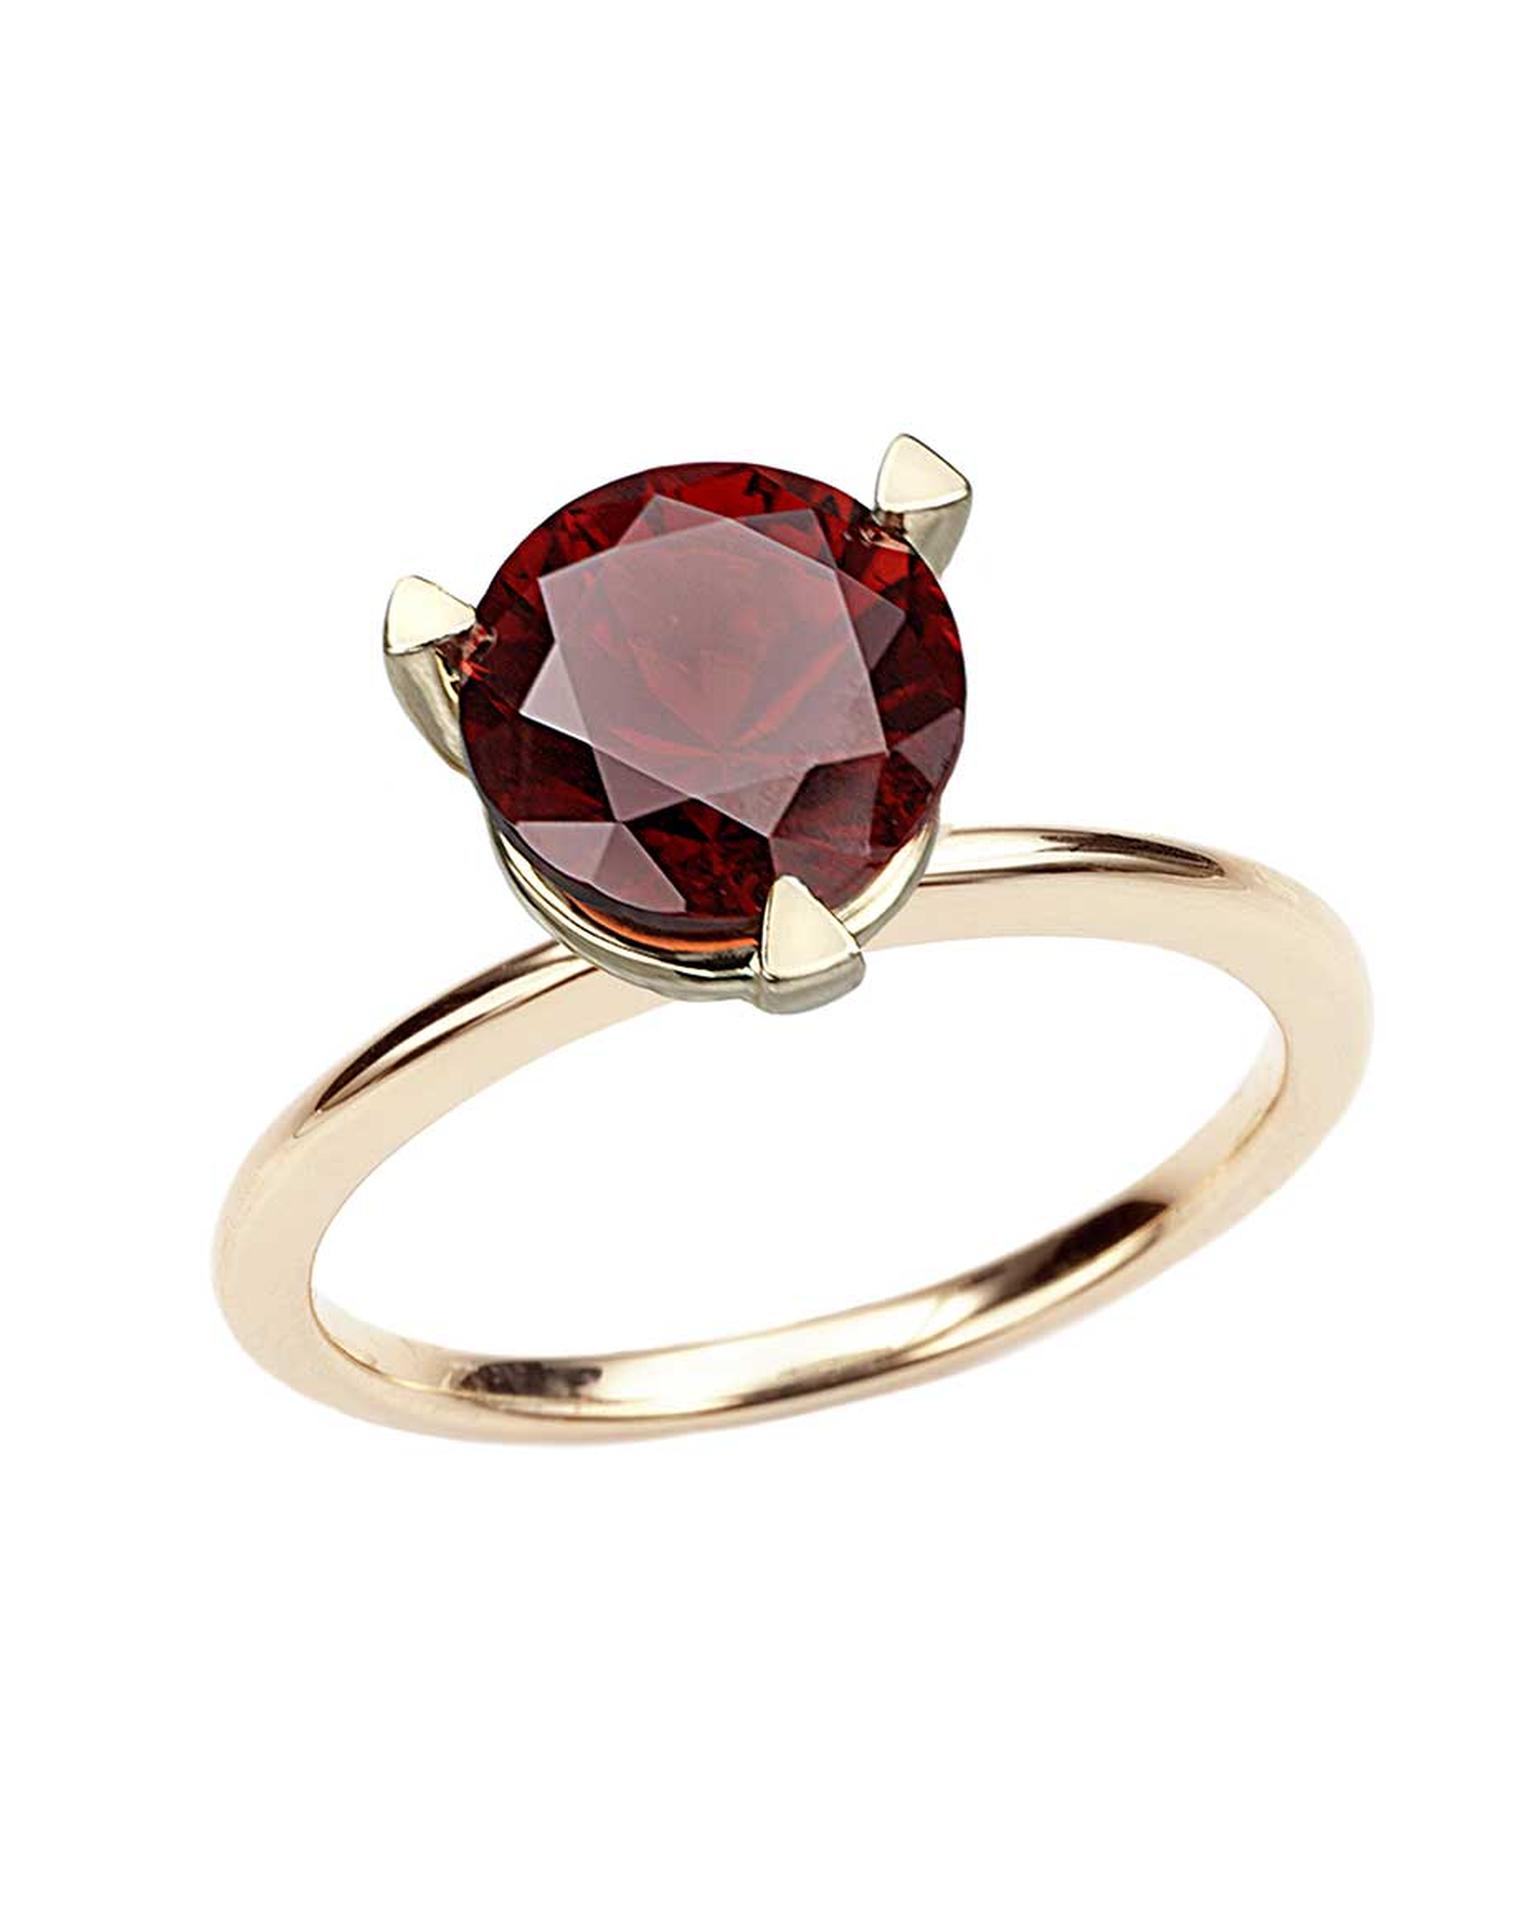 Octium Pop ring in yellow gold, set with a round pyrope garnet.